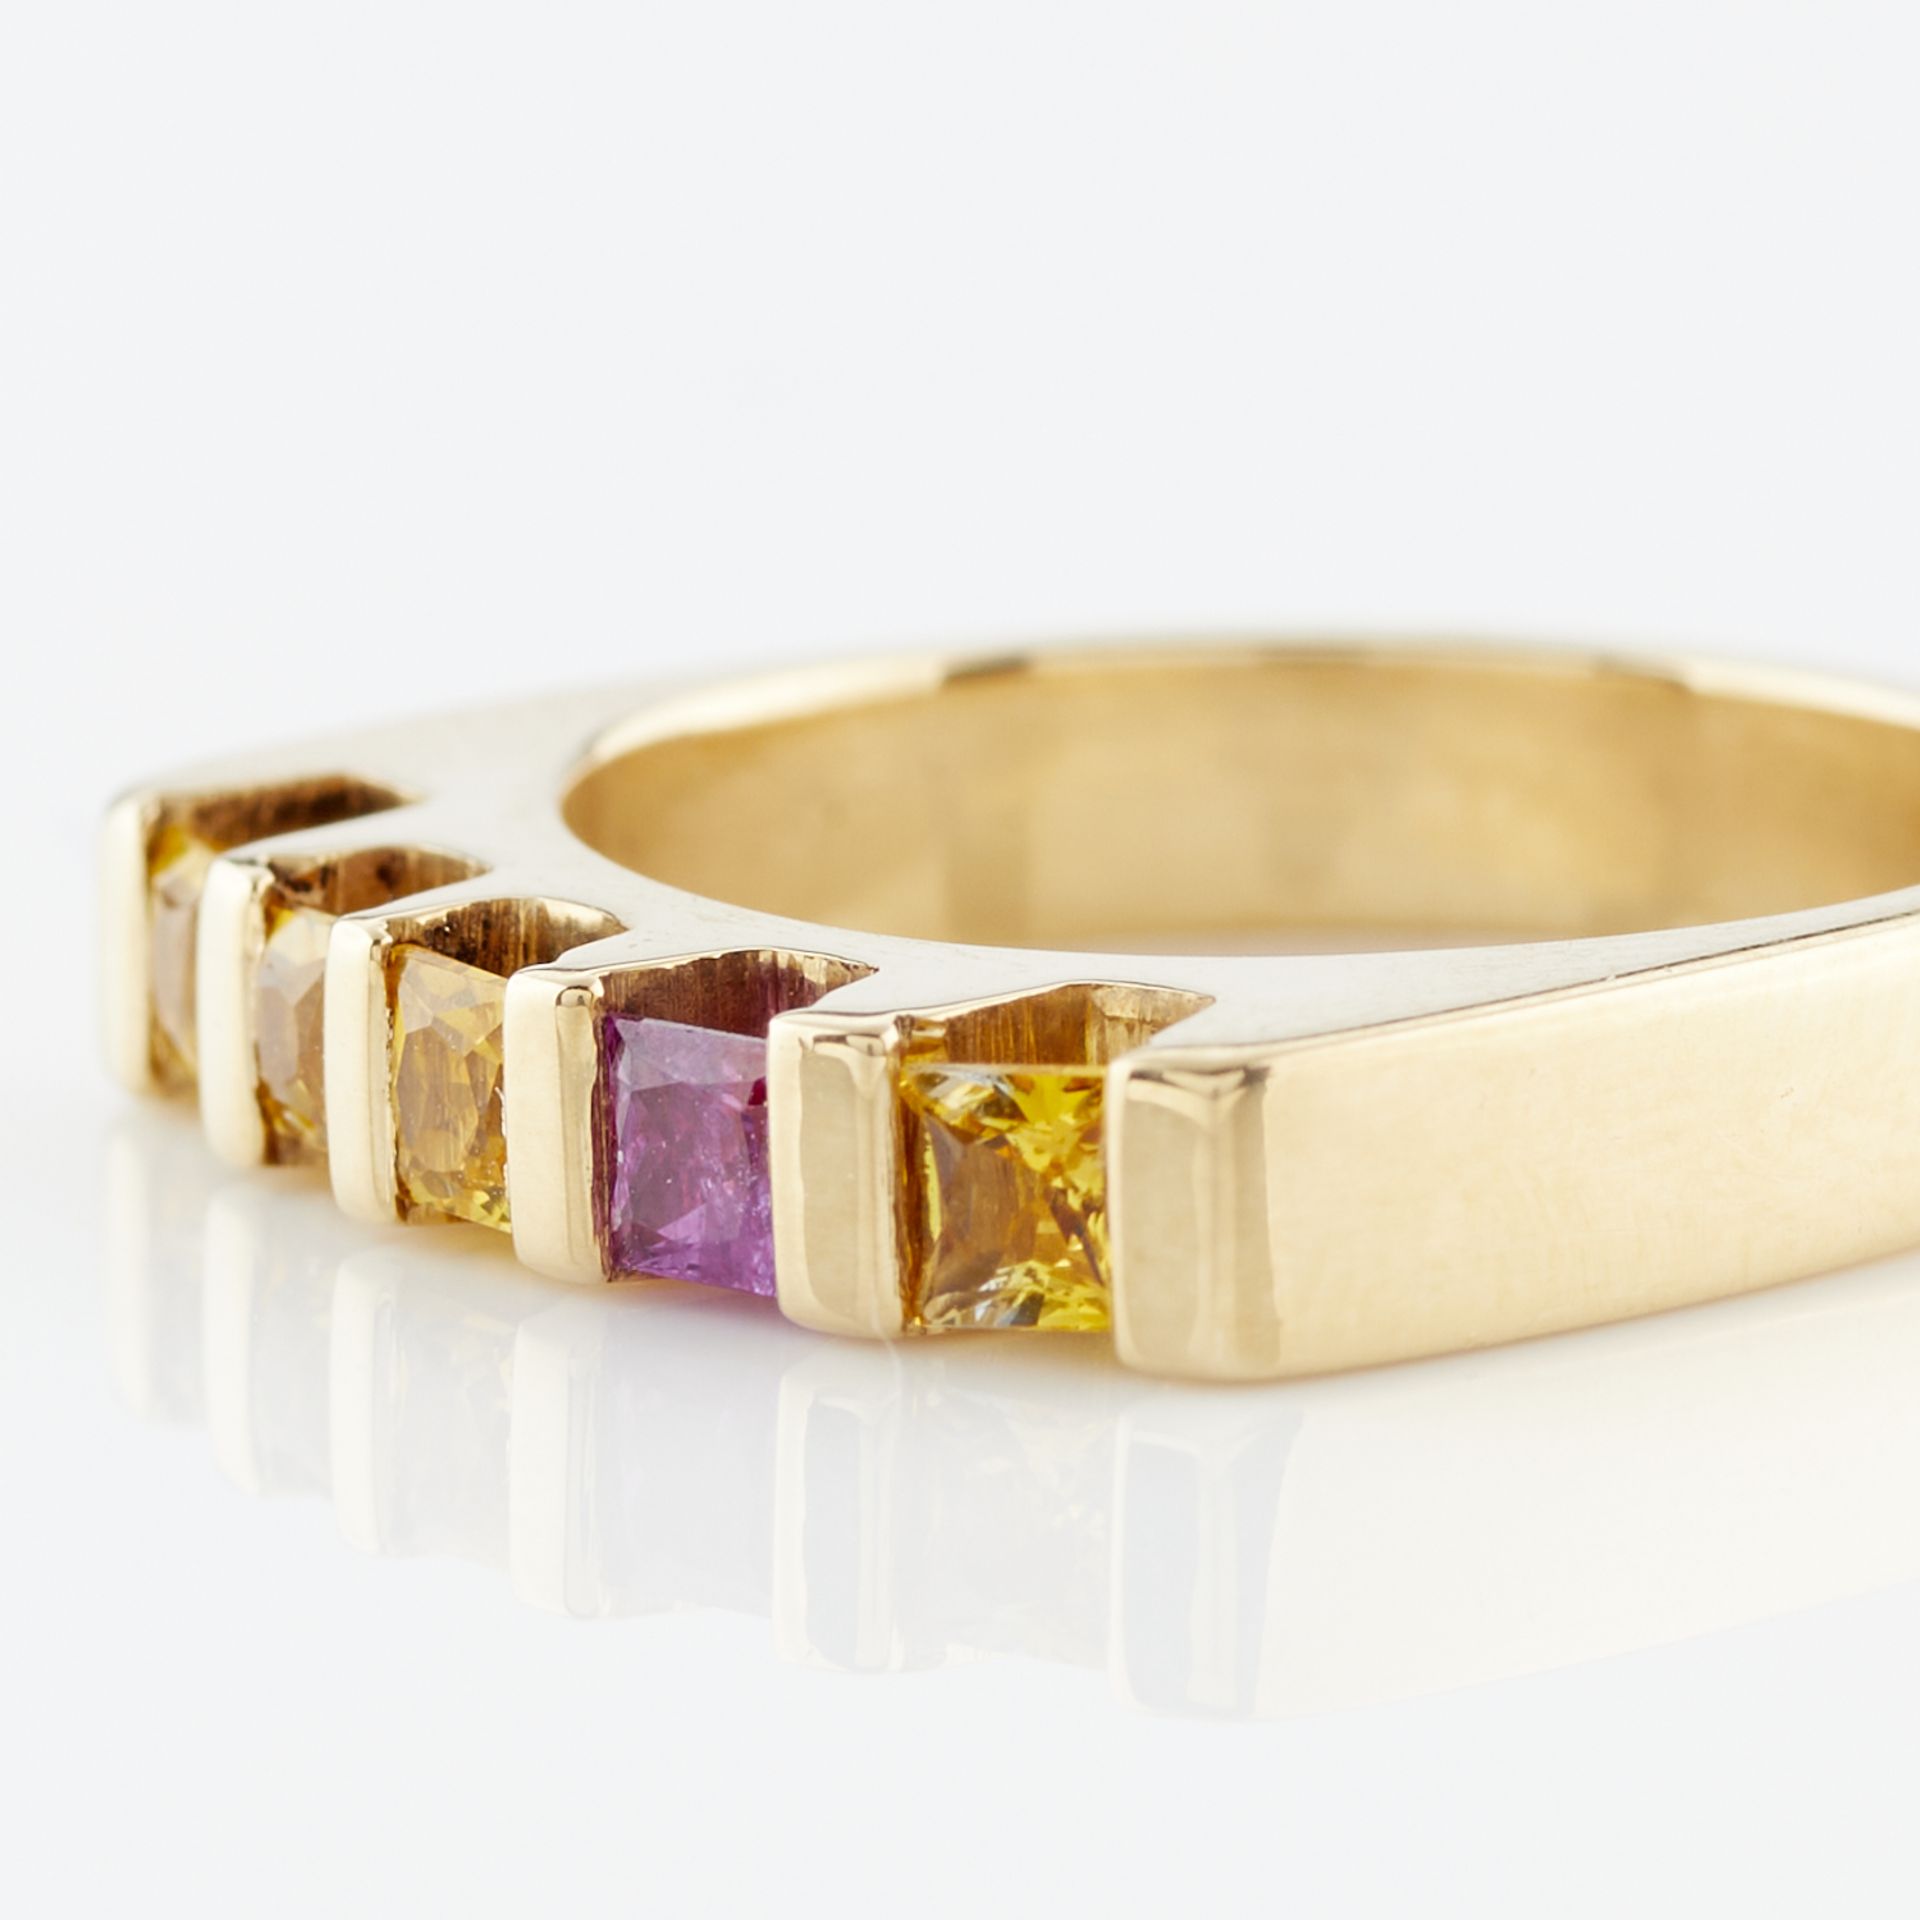 14k Yellow Gold & Sapphire Ring - Image 11 of 11